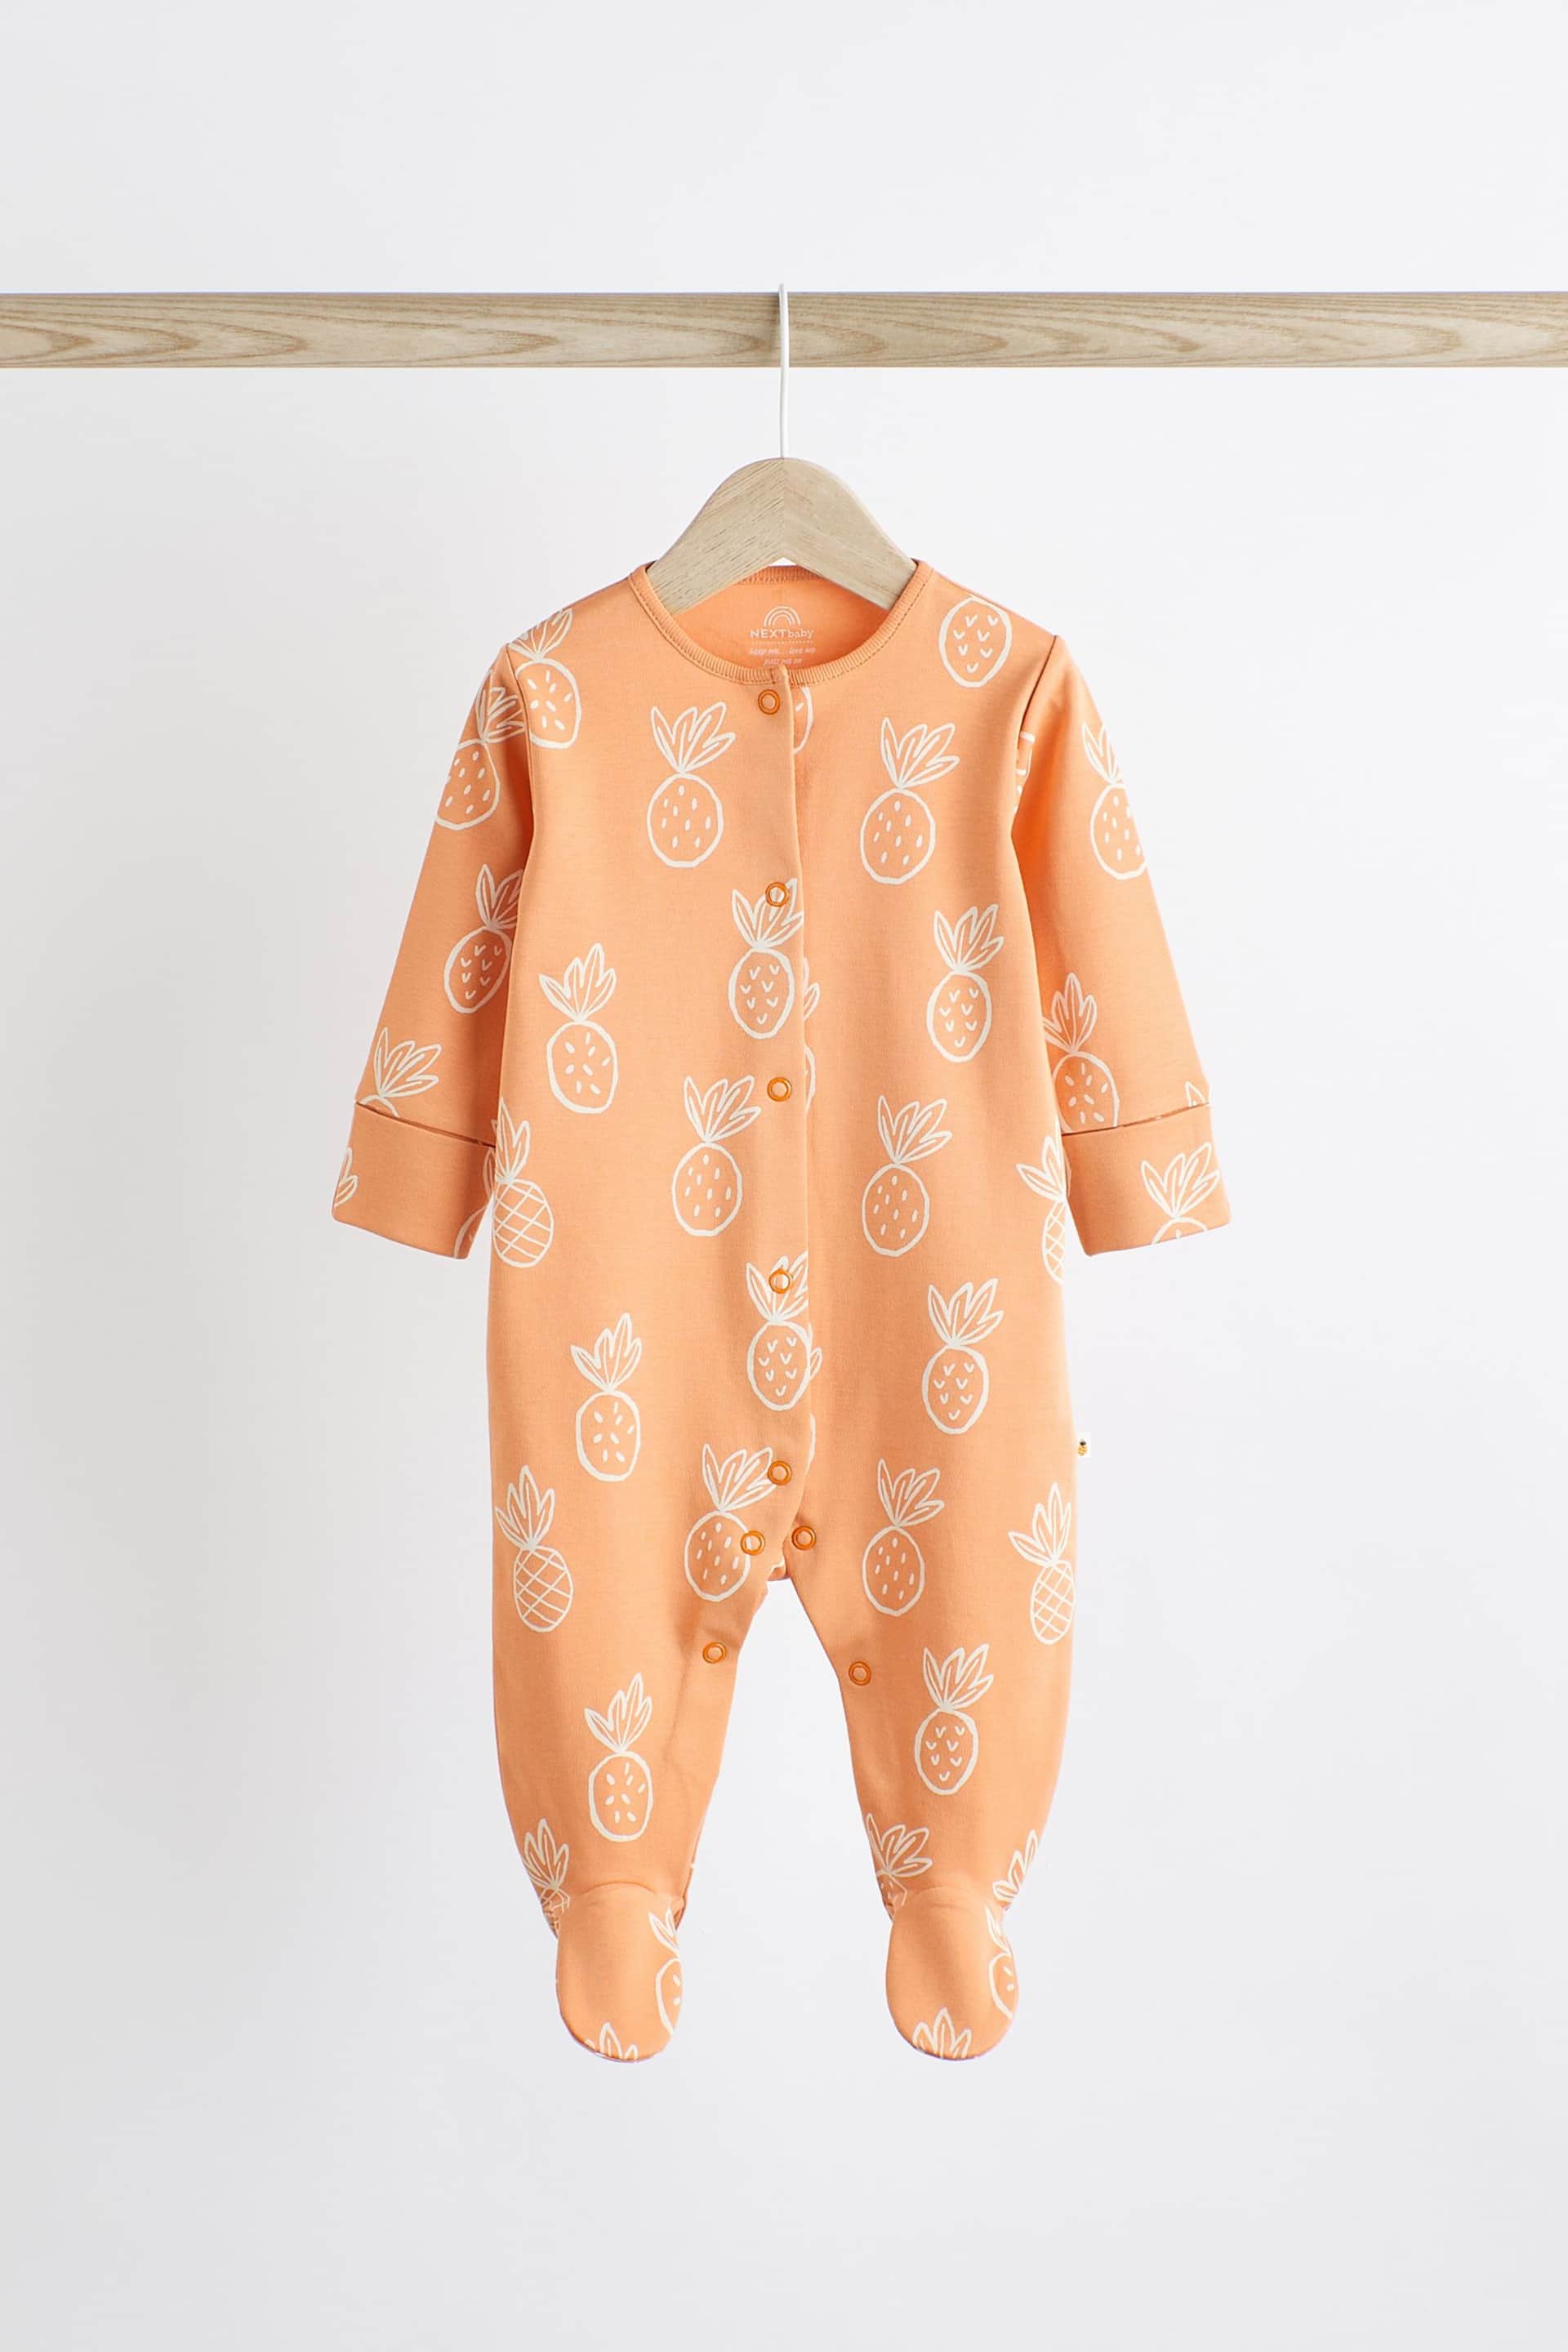 Bright Palm Print Baby Cotton Sleepsuits 5 Pack (0-2yrs) - Image 6 of 13